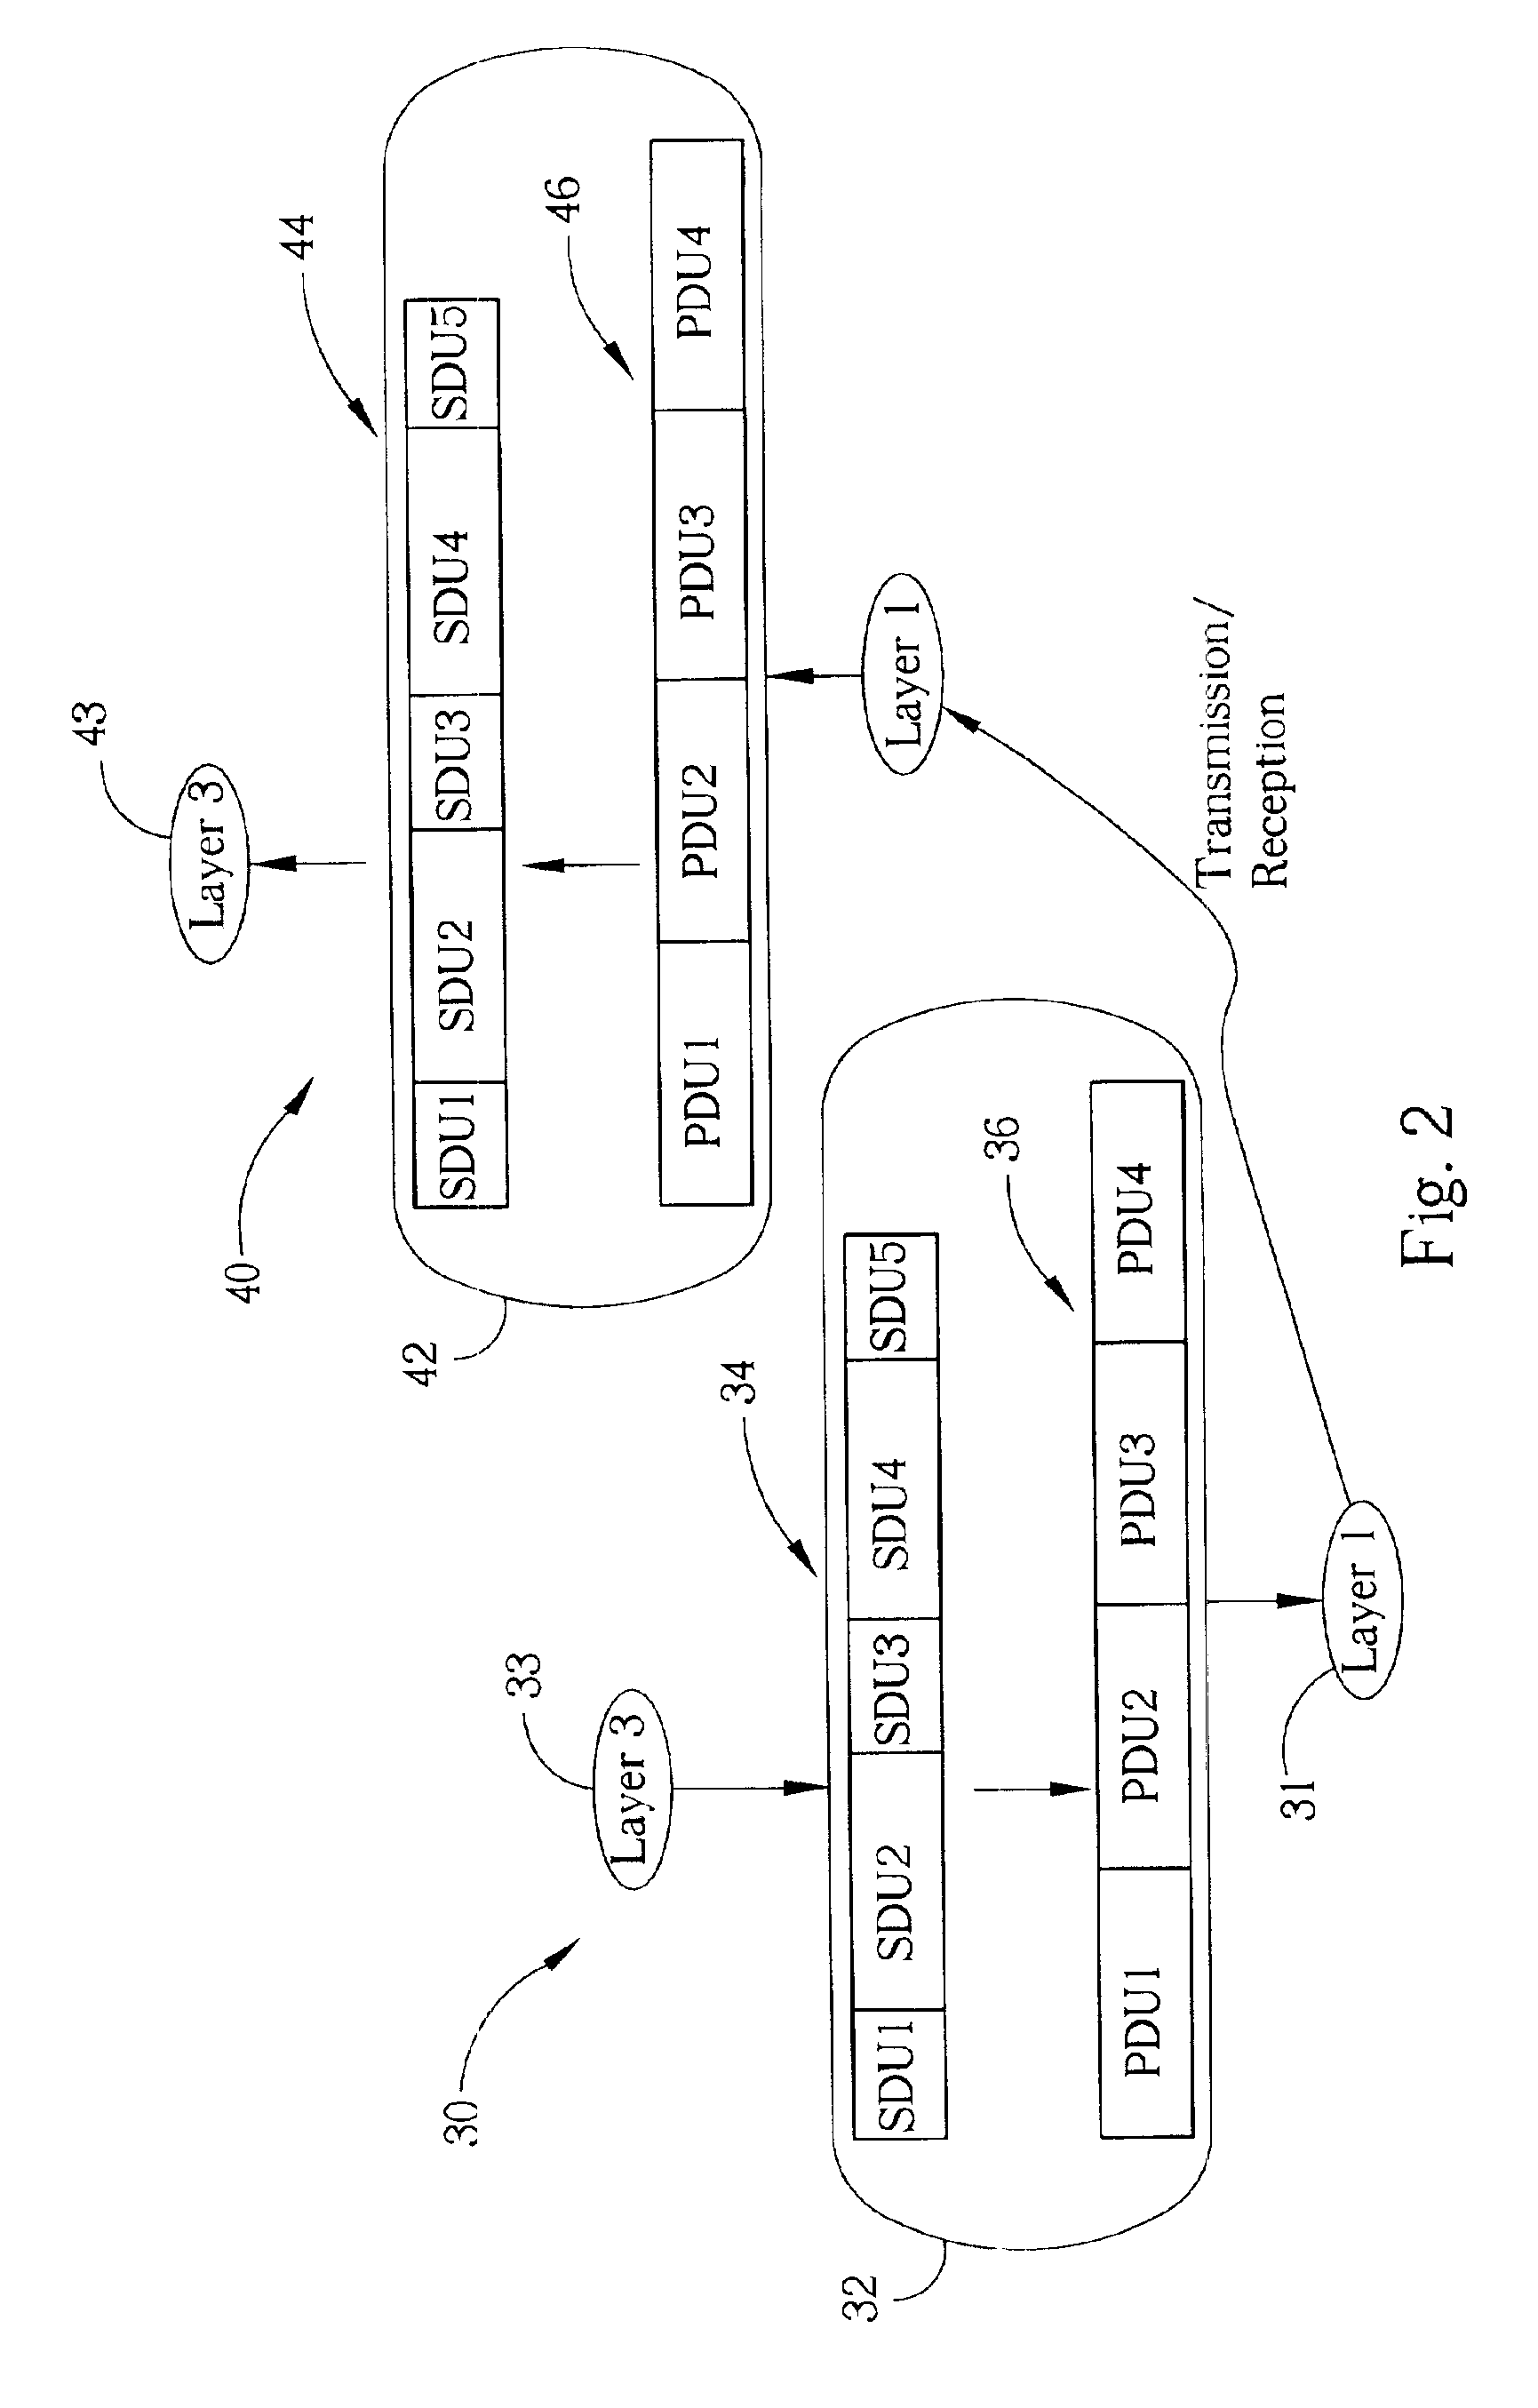 Processing unexpected transmission interruptions in a wireless communications system